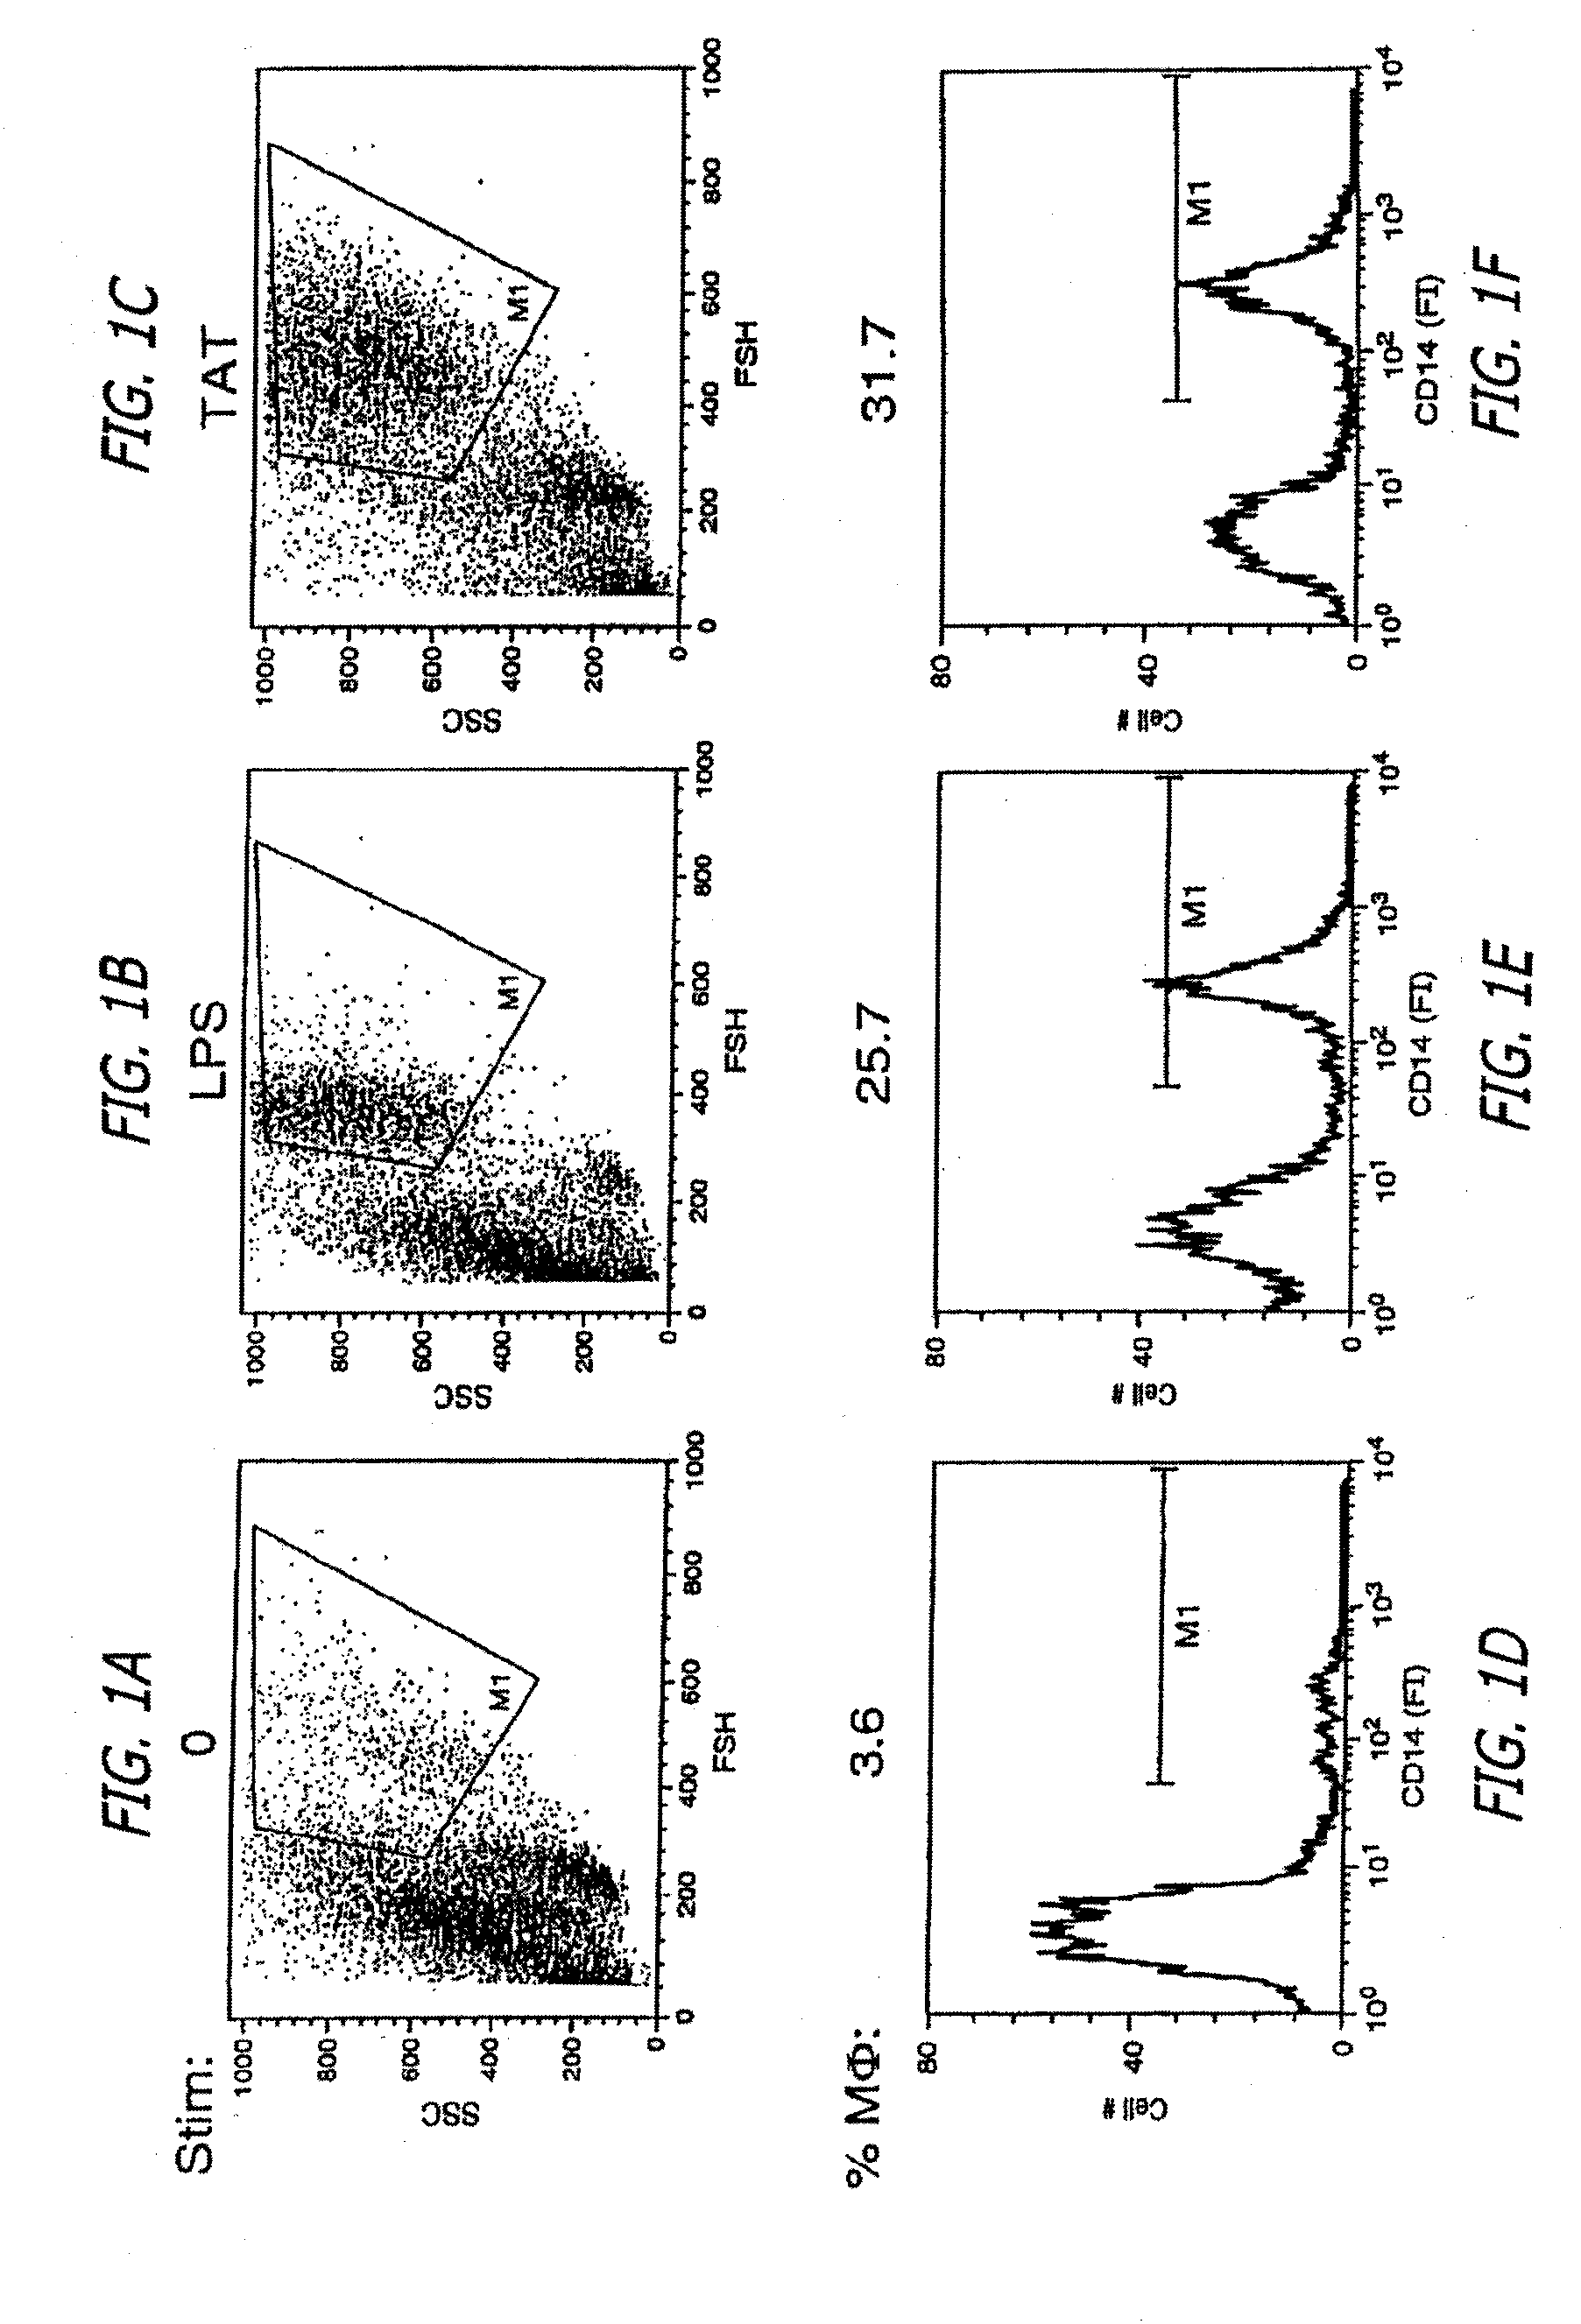 Vaccines and immunotherapeutics derived from the human immunodeficiency virus (HIV) transactivator of transcription protein for the treatment and prevention of HIV disease